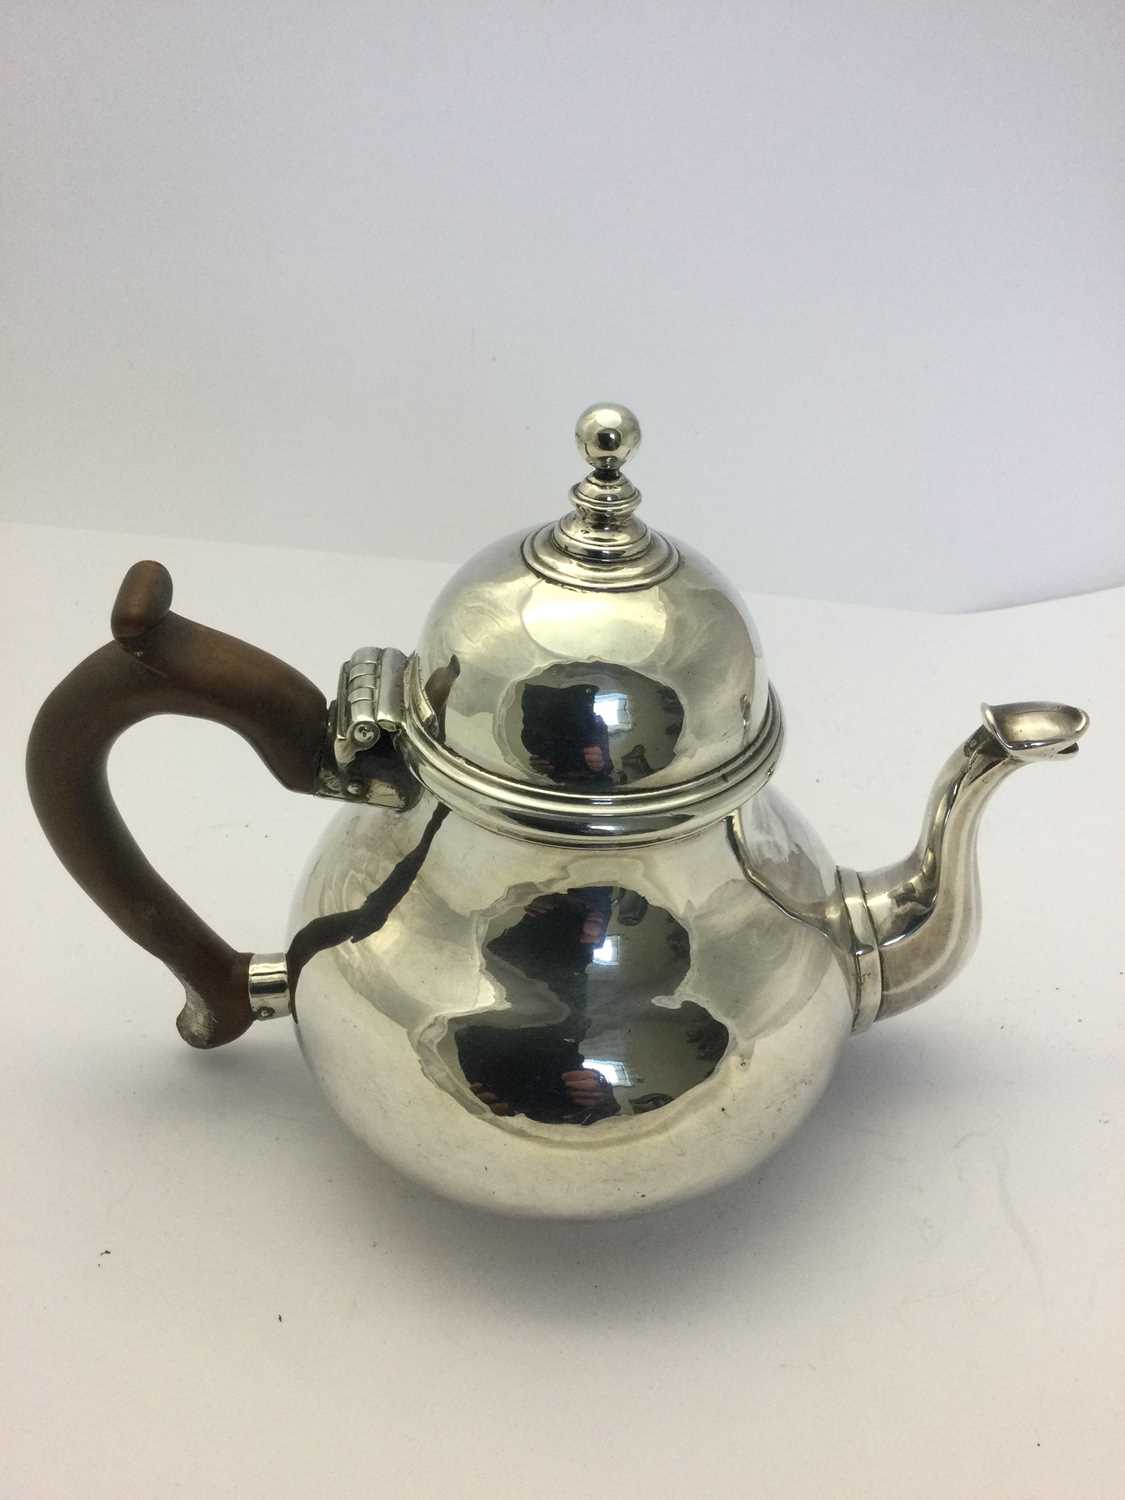 A Queen Anne Silver Teapot, by William Gamble, London, 1712 - Image 3 of 6